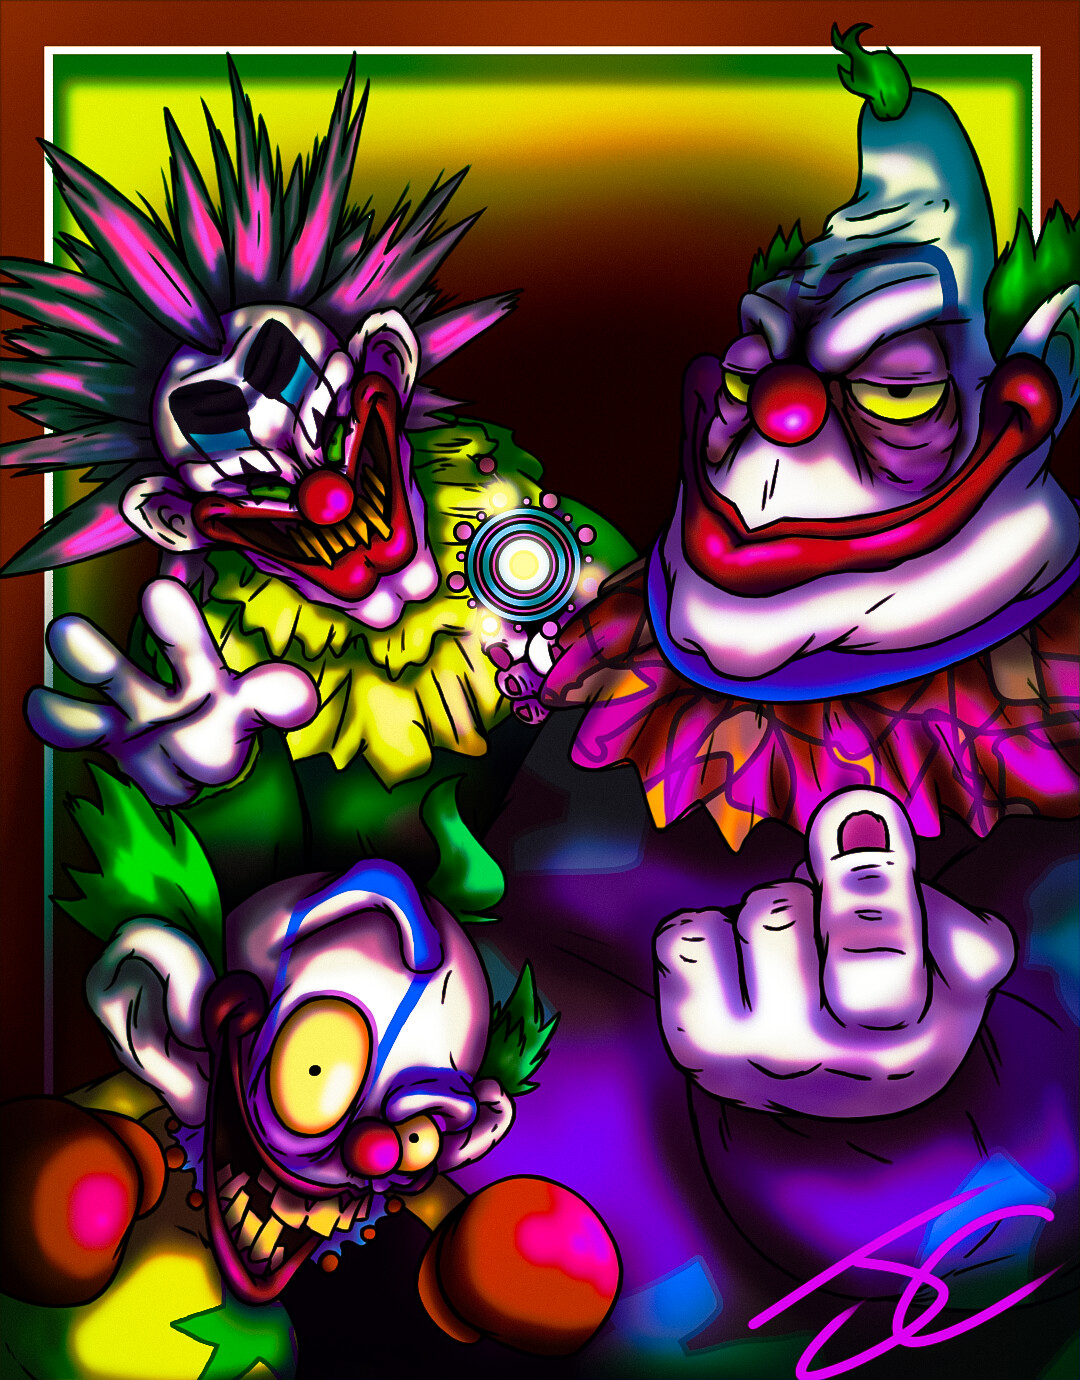 killer klowns from outer space wallpaper